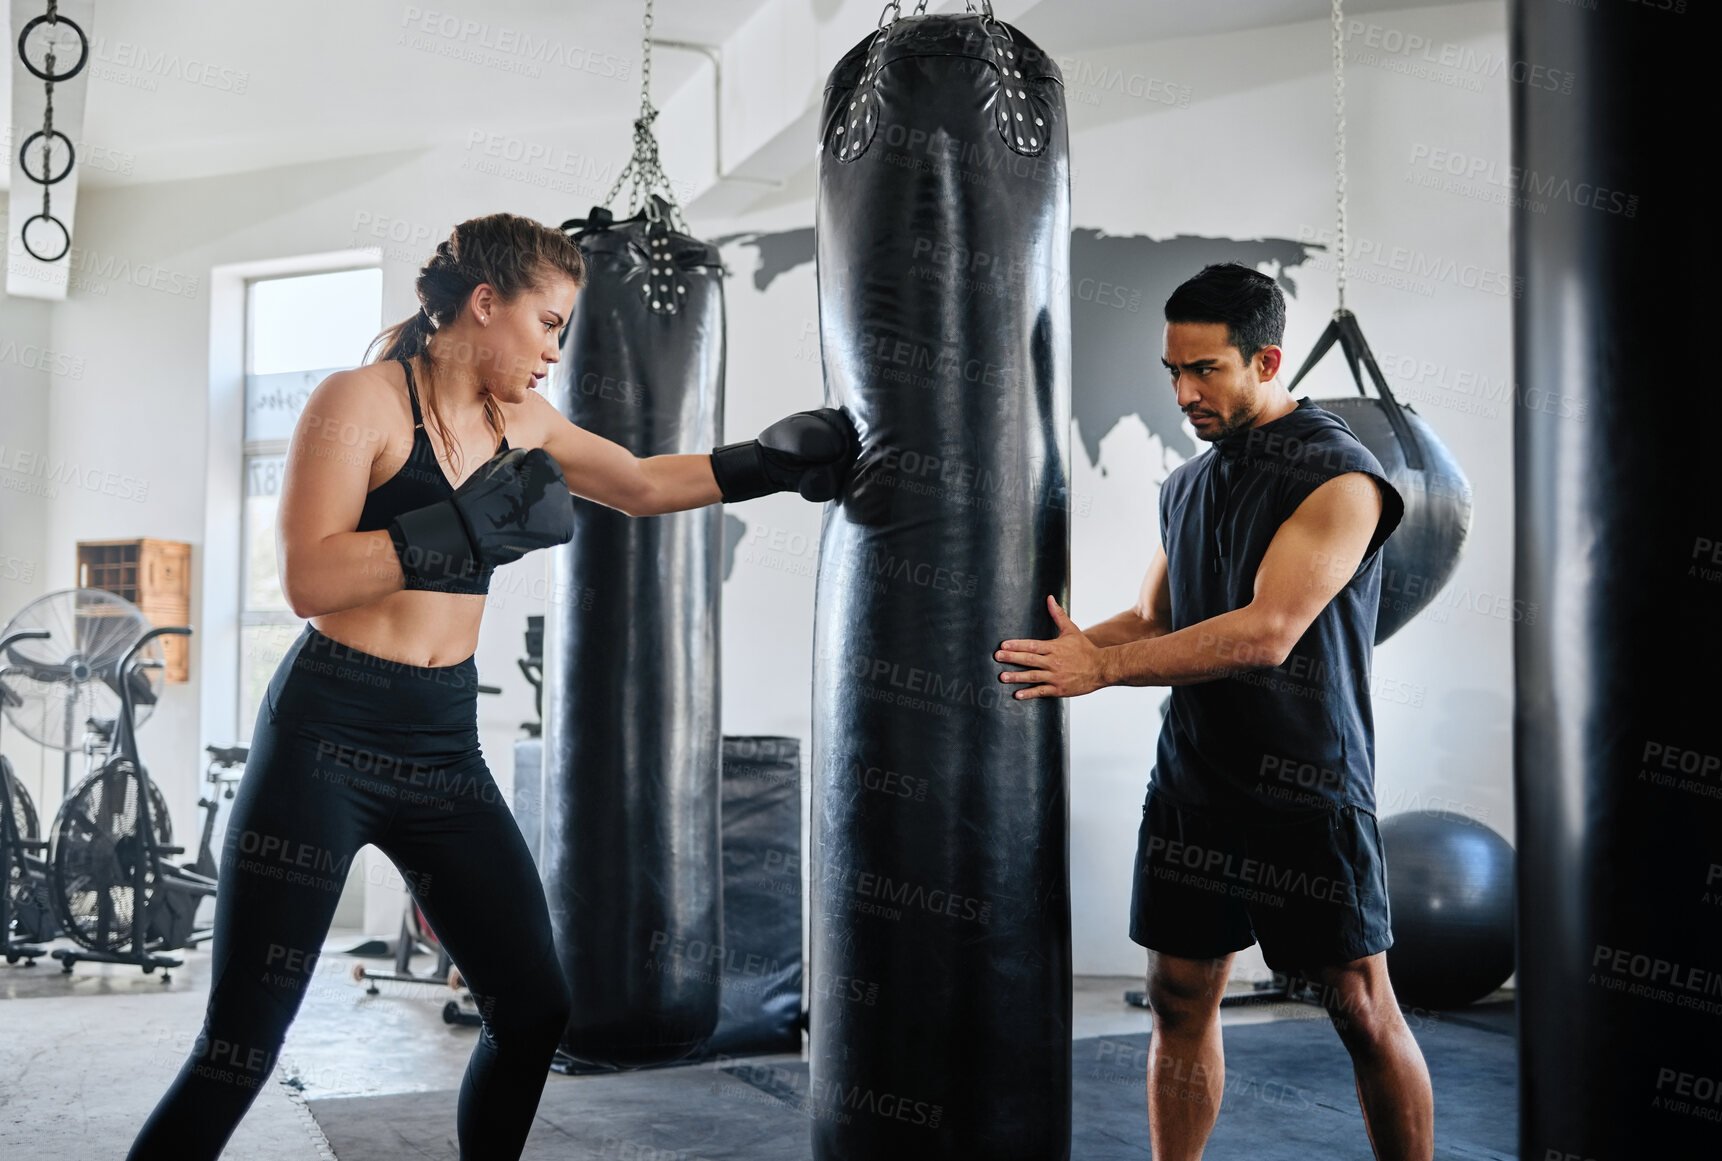 Buy stock photo Healthy, fit and active female boxer training, exercising and sparring with her coach, trainer or instructor in the gym or health club. Young woman preparing for a boxing fight, match or competition